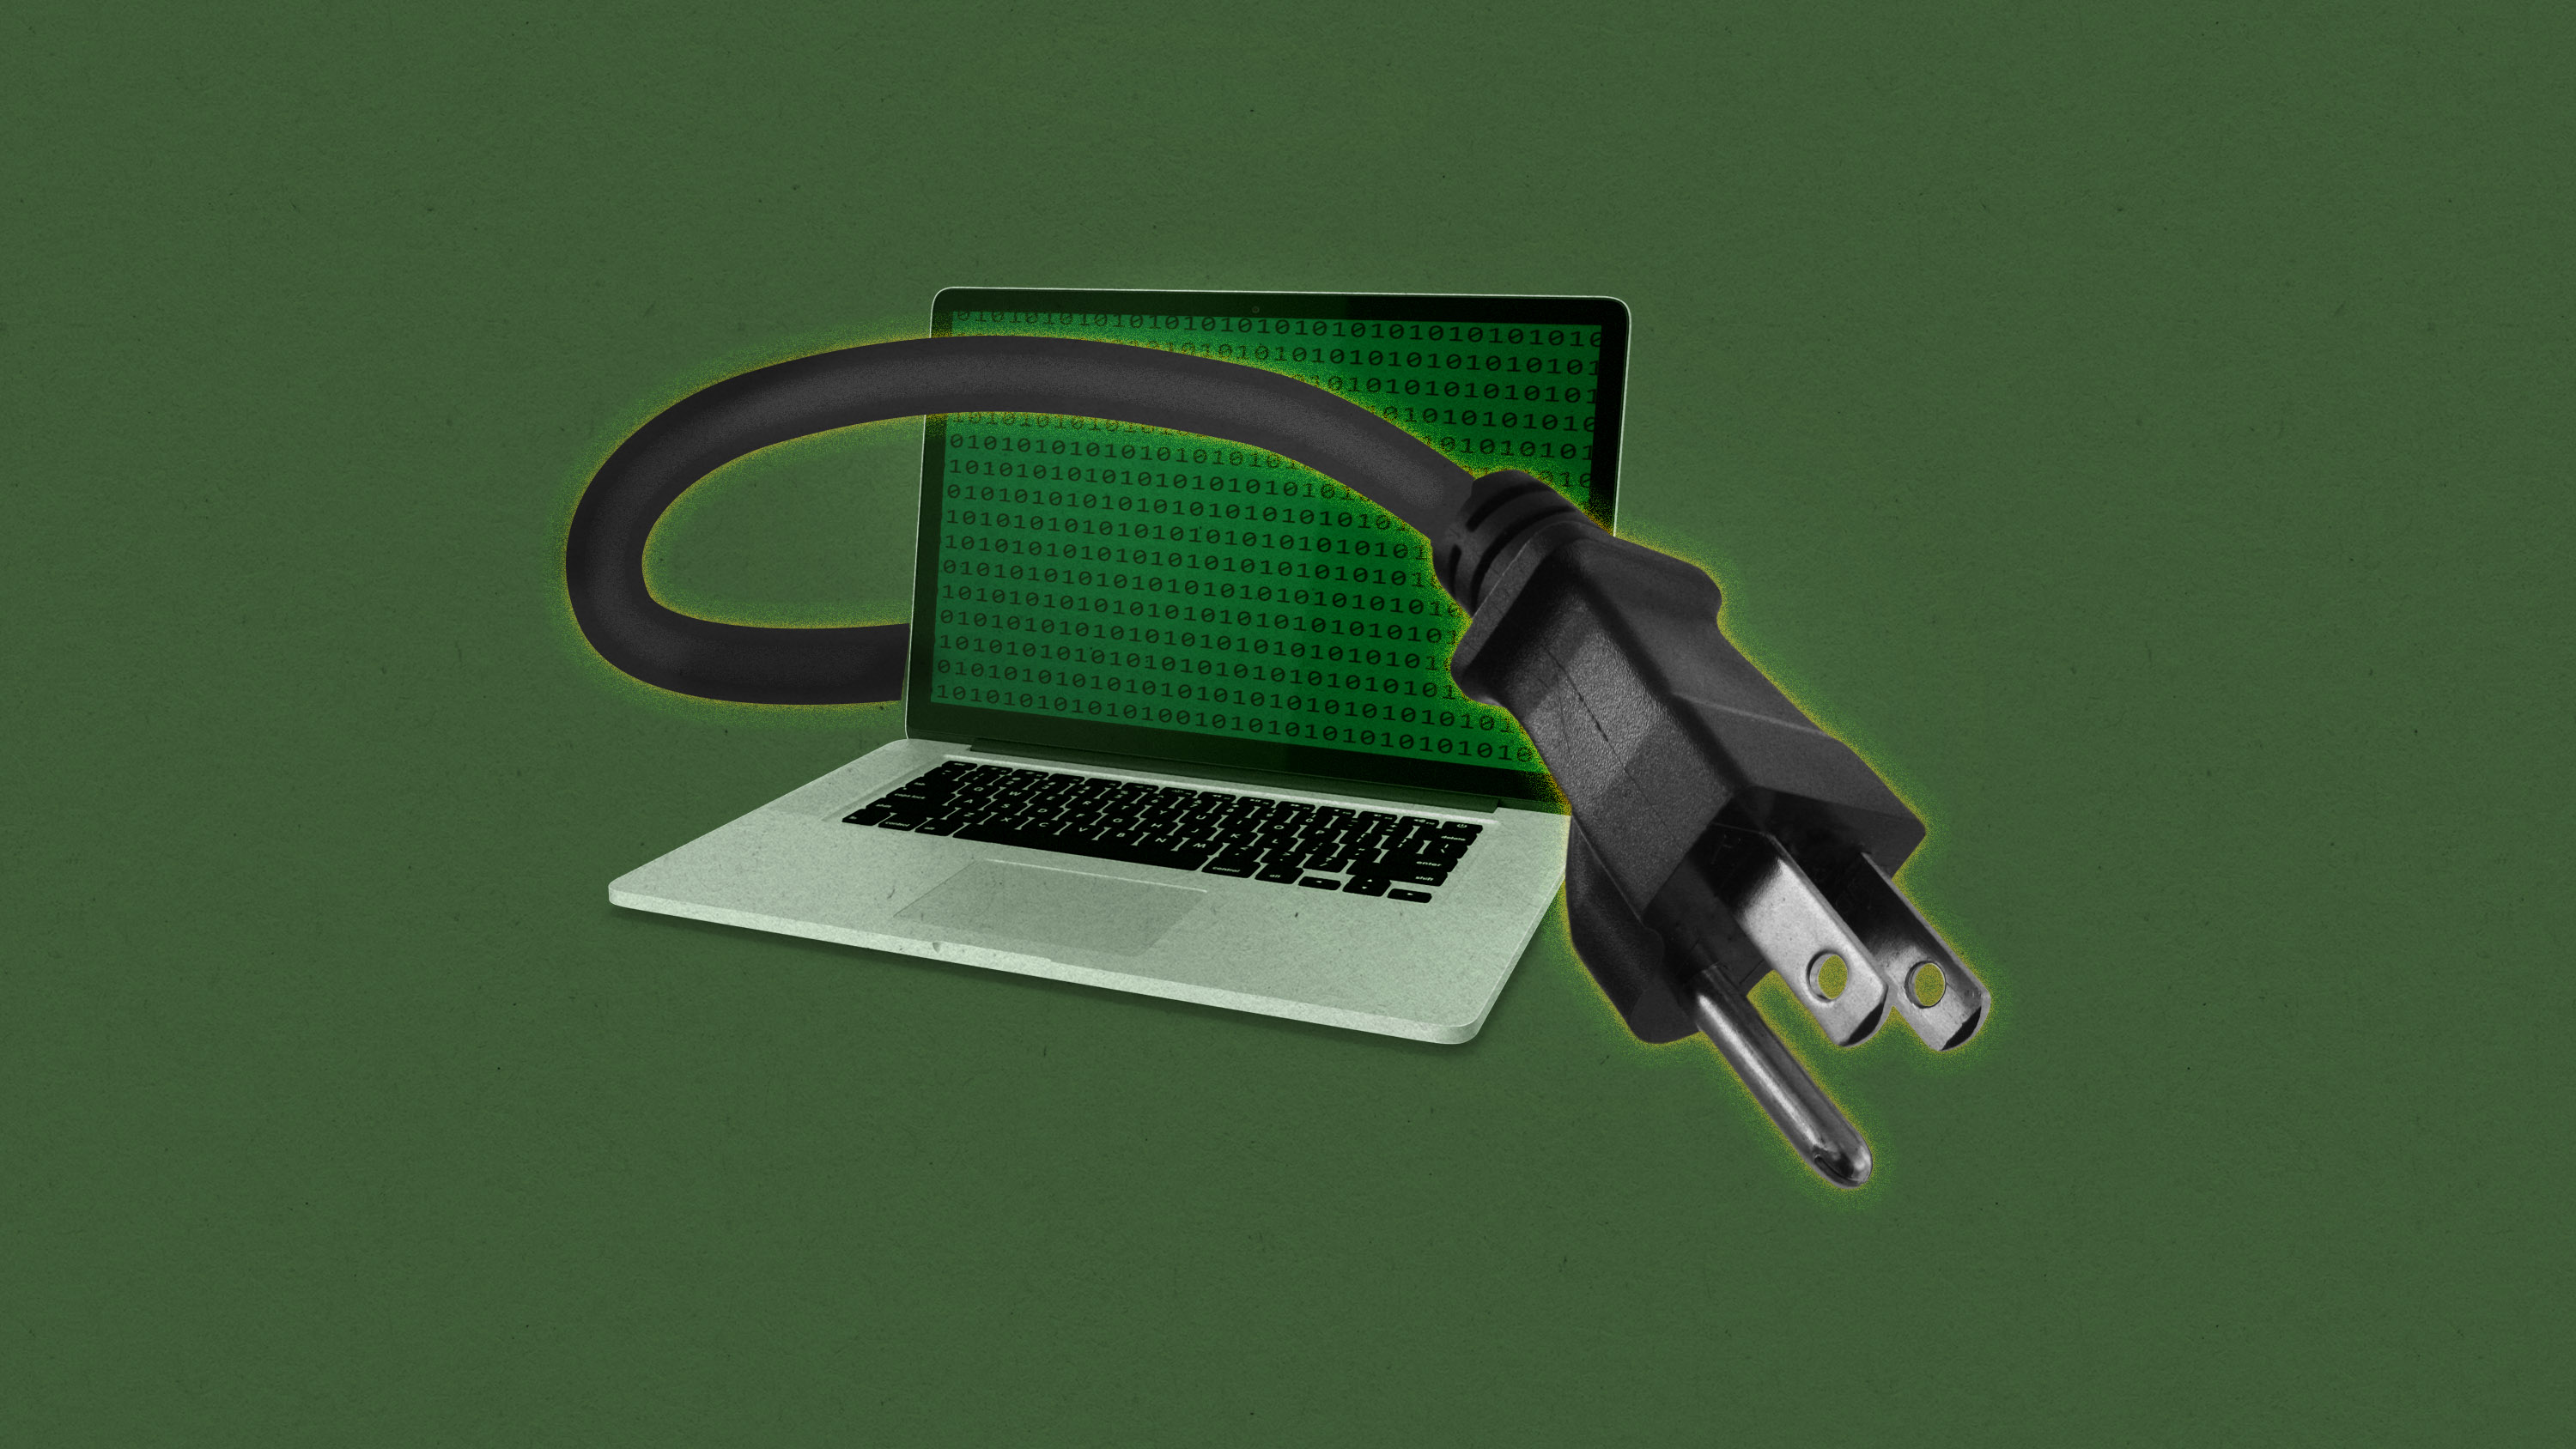 a laptop with an enormous power cord coming forward toward the viewer